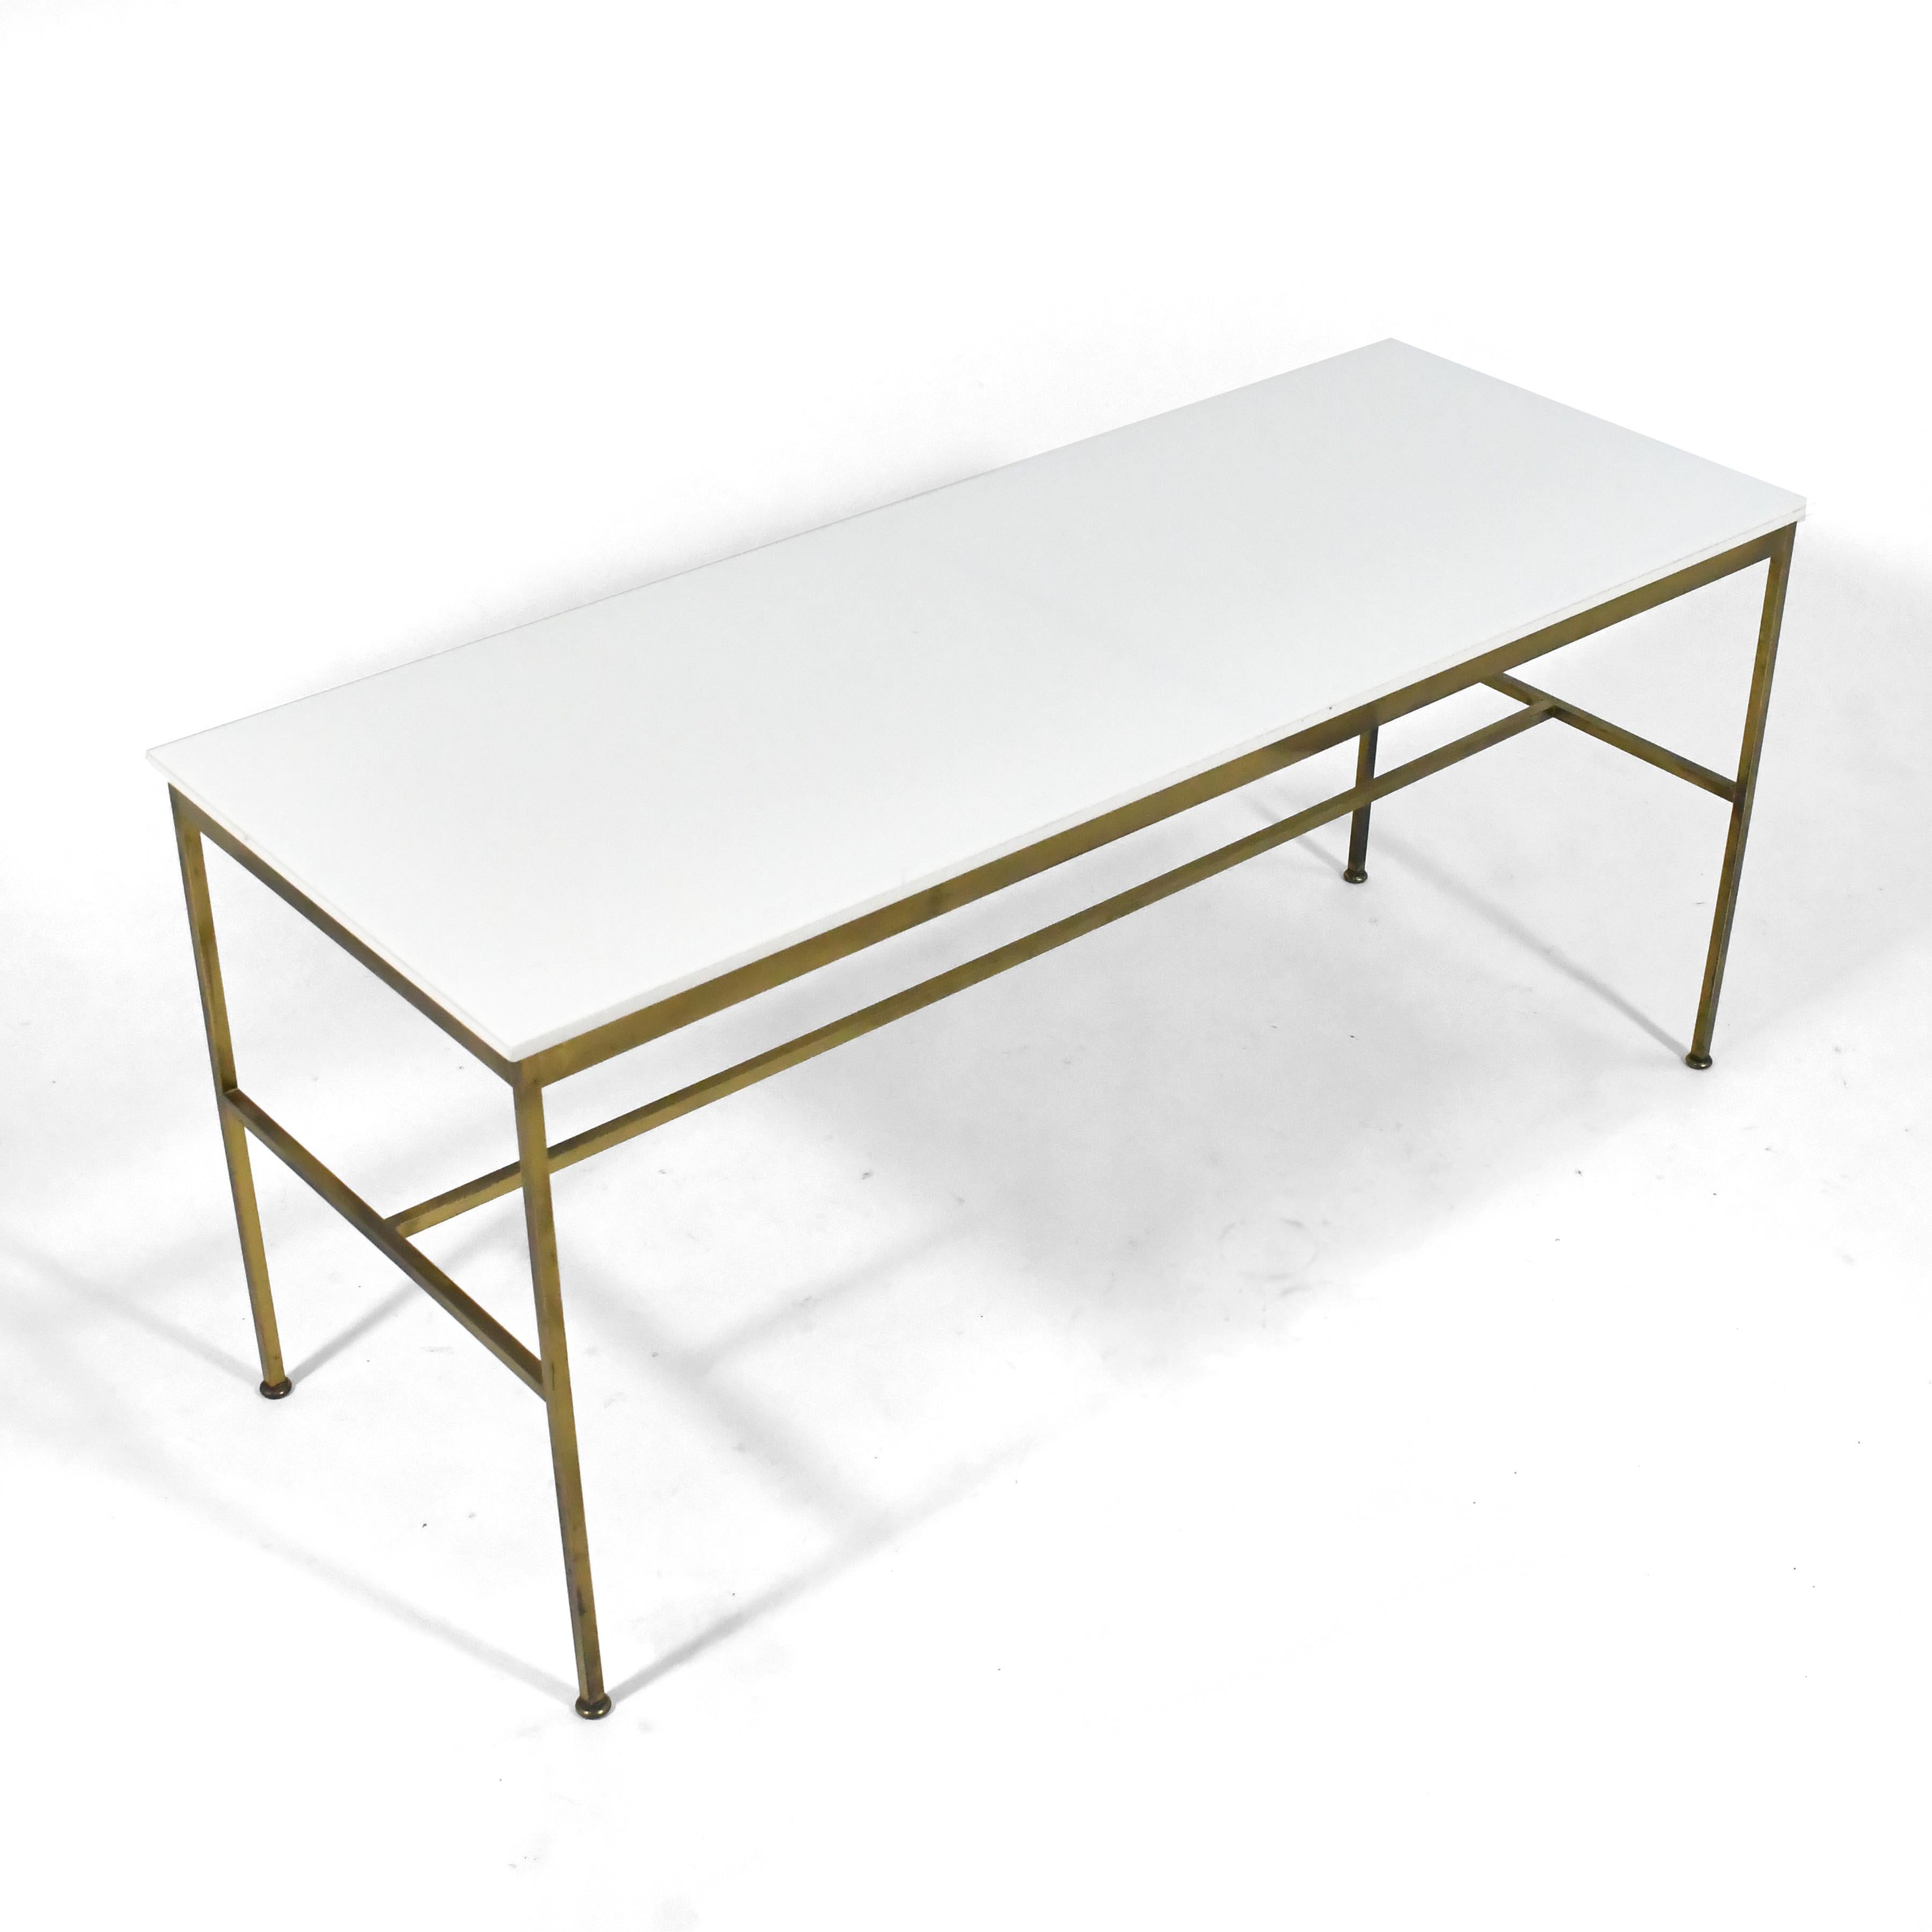 A stunning example of McCobb's masterful, minimalist design aesthetic, this sublime console table features a brass base which supports a top of opaque white Vitrolite glass.

This rare vintage table is in very good original condition with a most